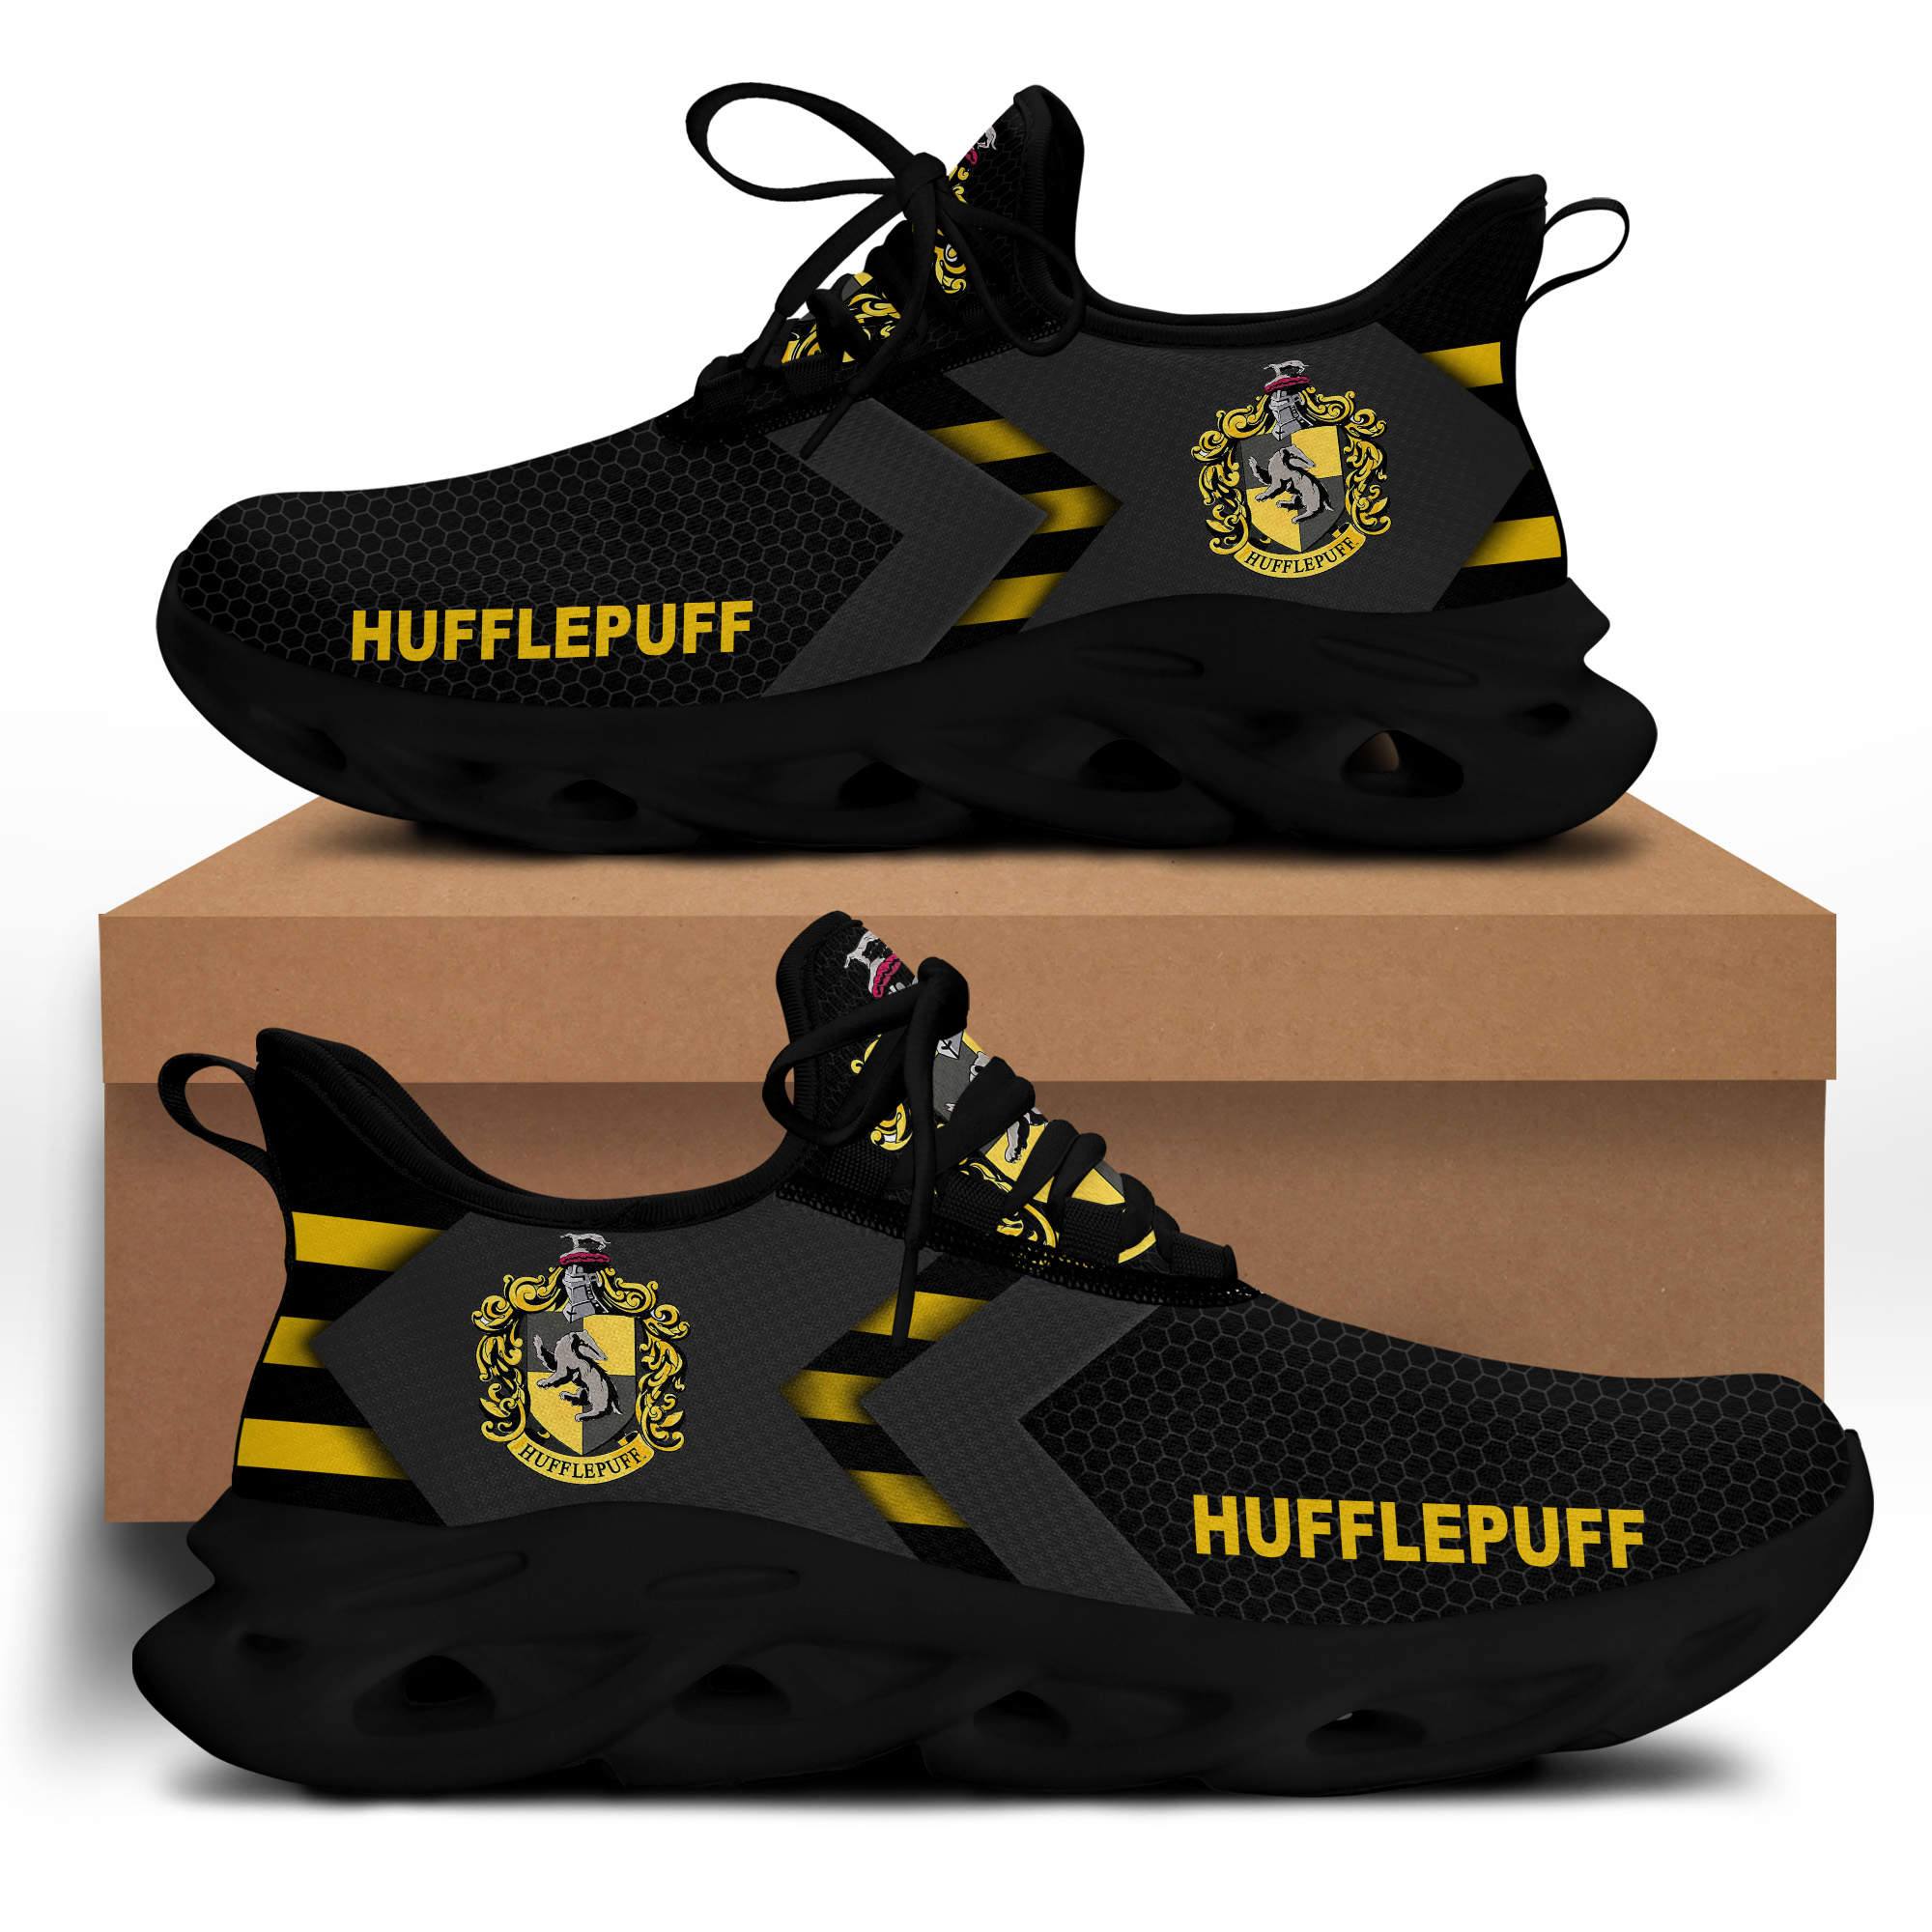 Harry Potter Hufflepuff team house clunky max soul shoes – LIMITED EDITION